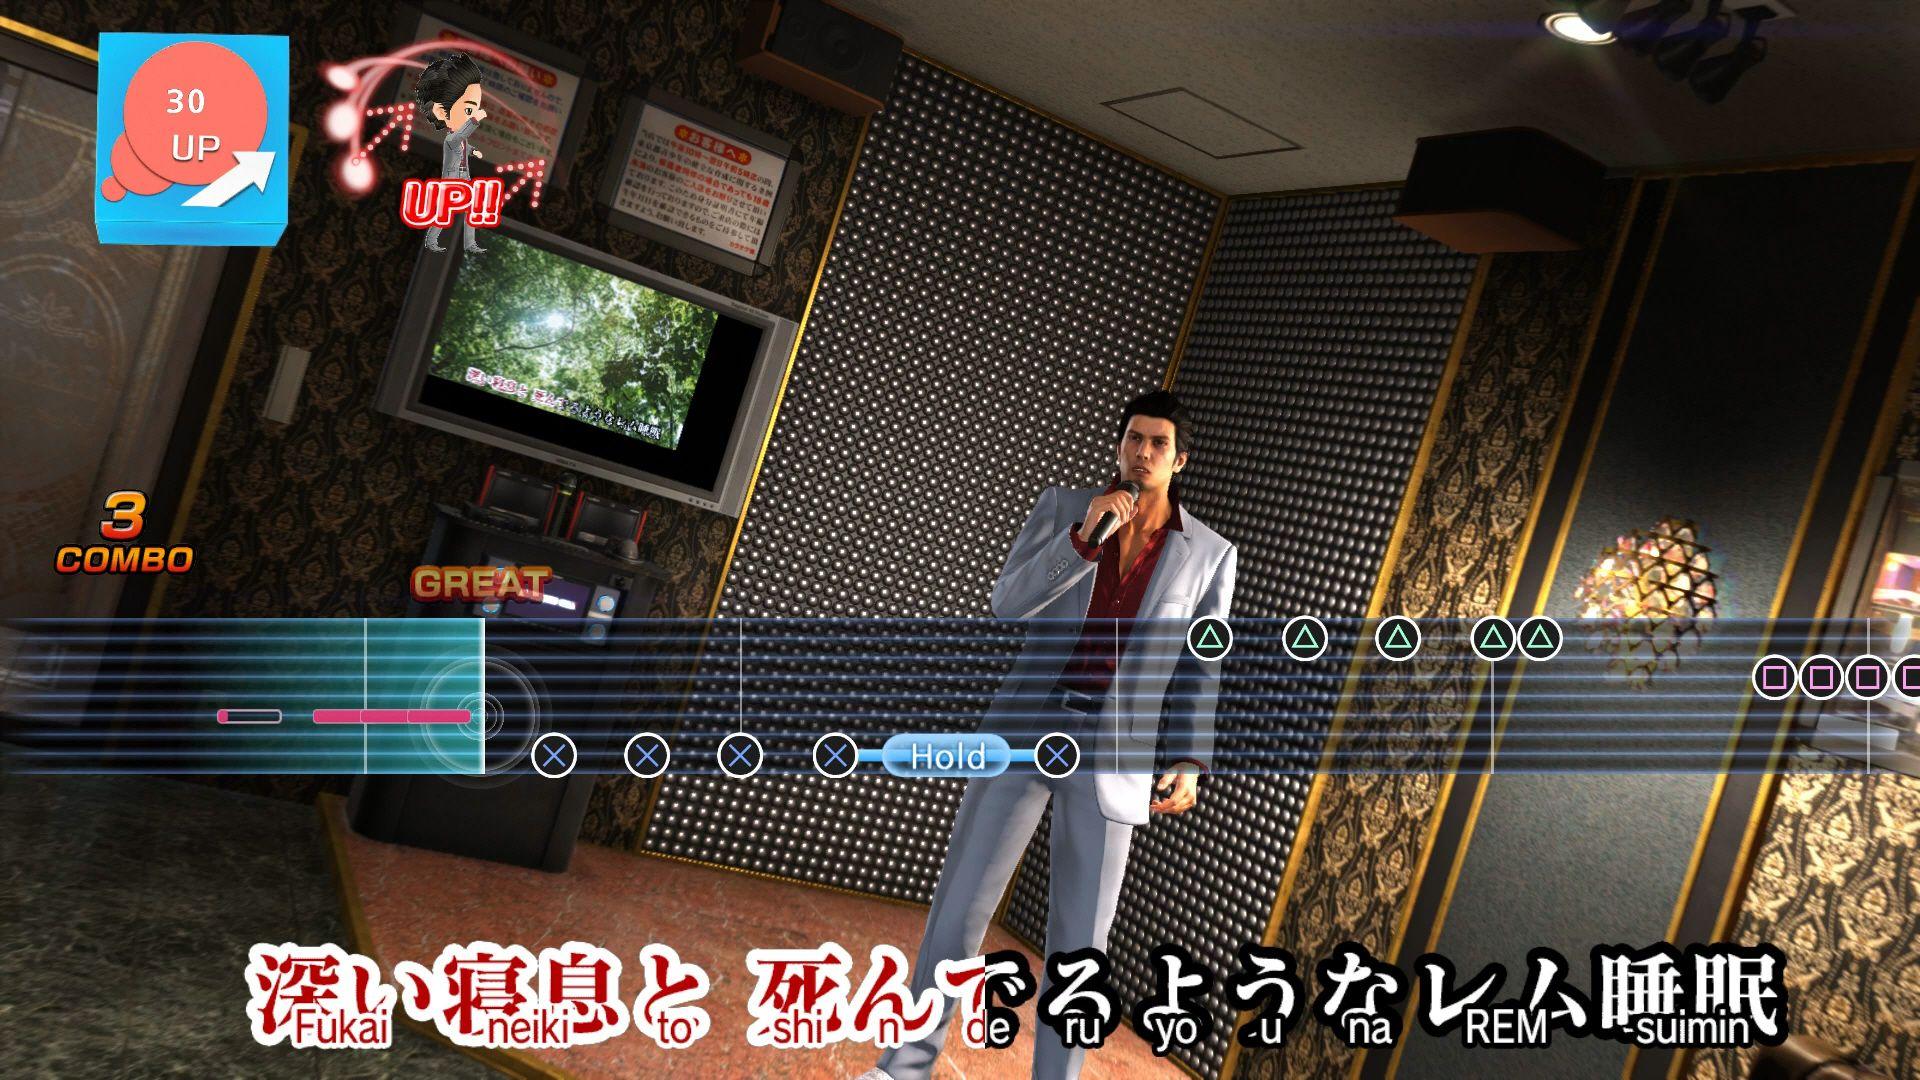 Yakuza 6, The Song of Life (After Hours Premium Edition)